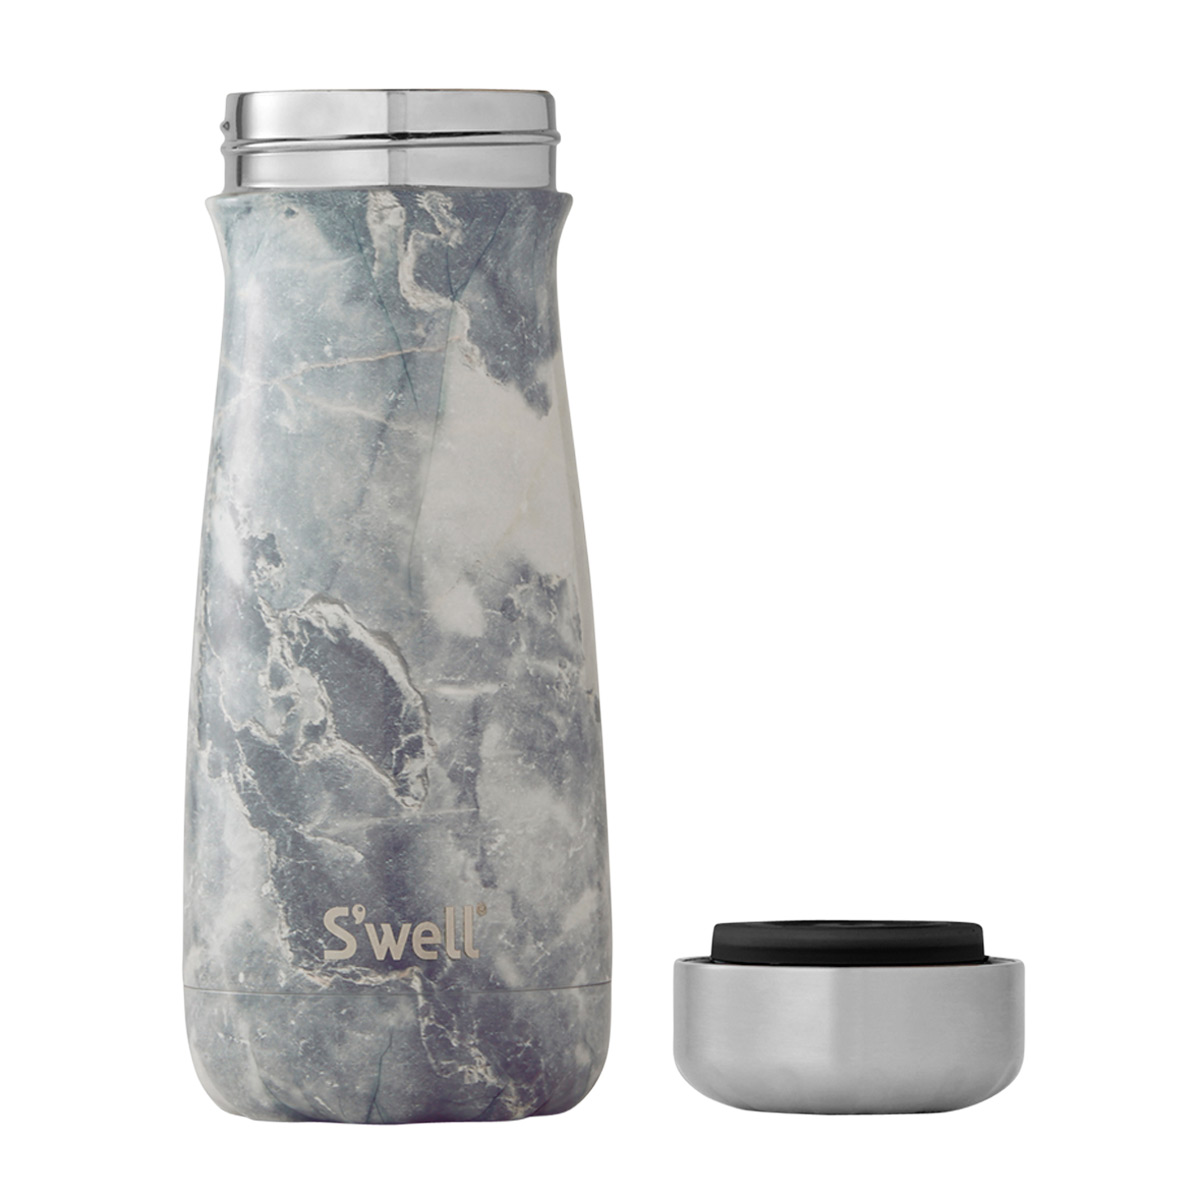 https://www.containerstore.com/catalogimages/427047/10086650-Swell-Traveler-Blue-VEN2.jpg